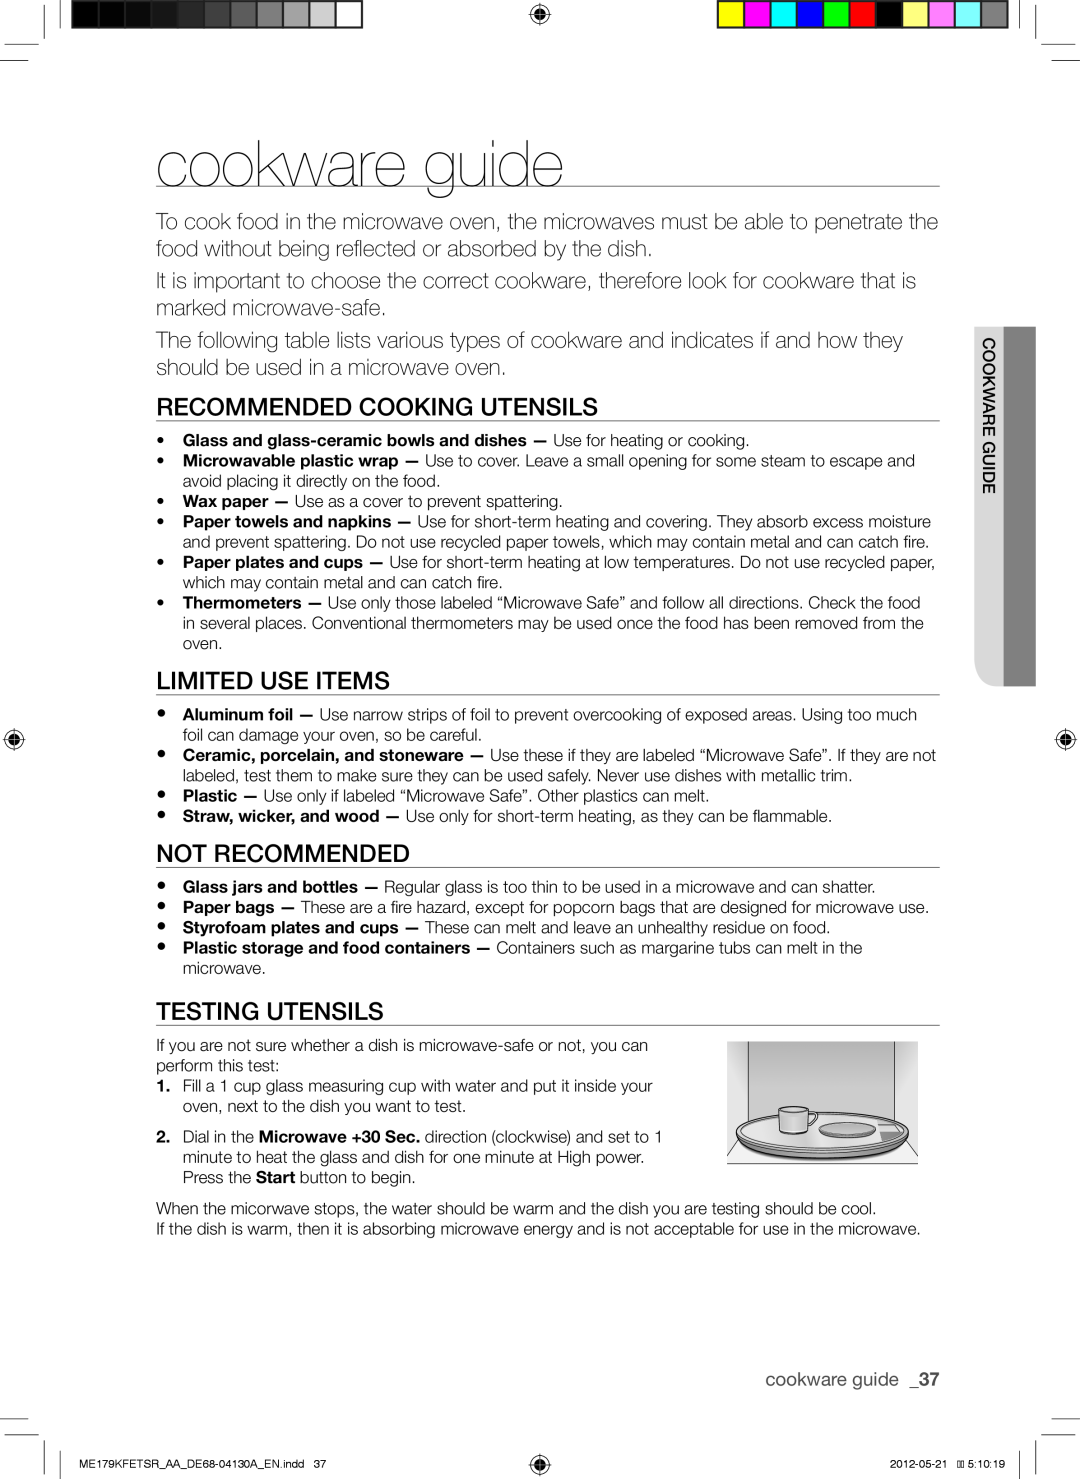 Samsung ME179KFETSR cookware guide, Recommended Cooking Utensils, Limited Use Items, Not Recommended, Testing Utensils 